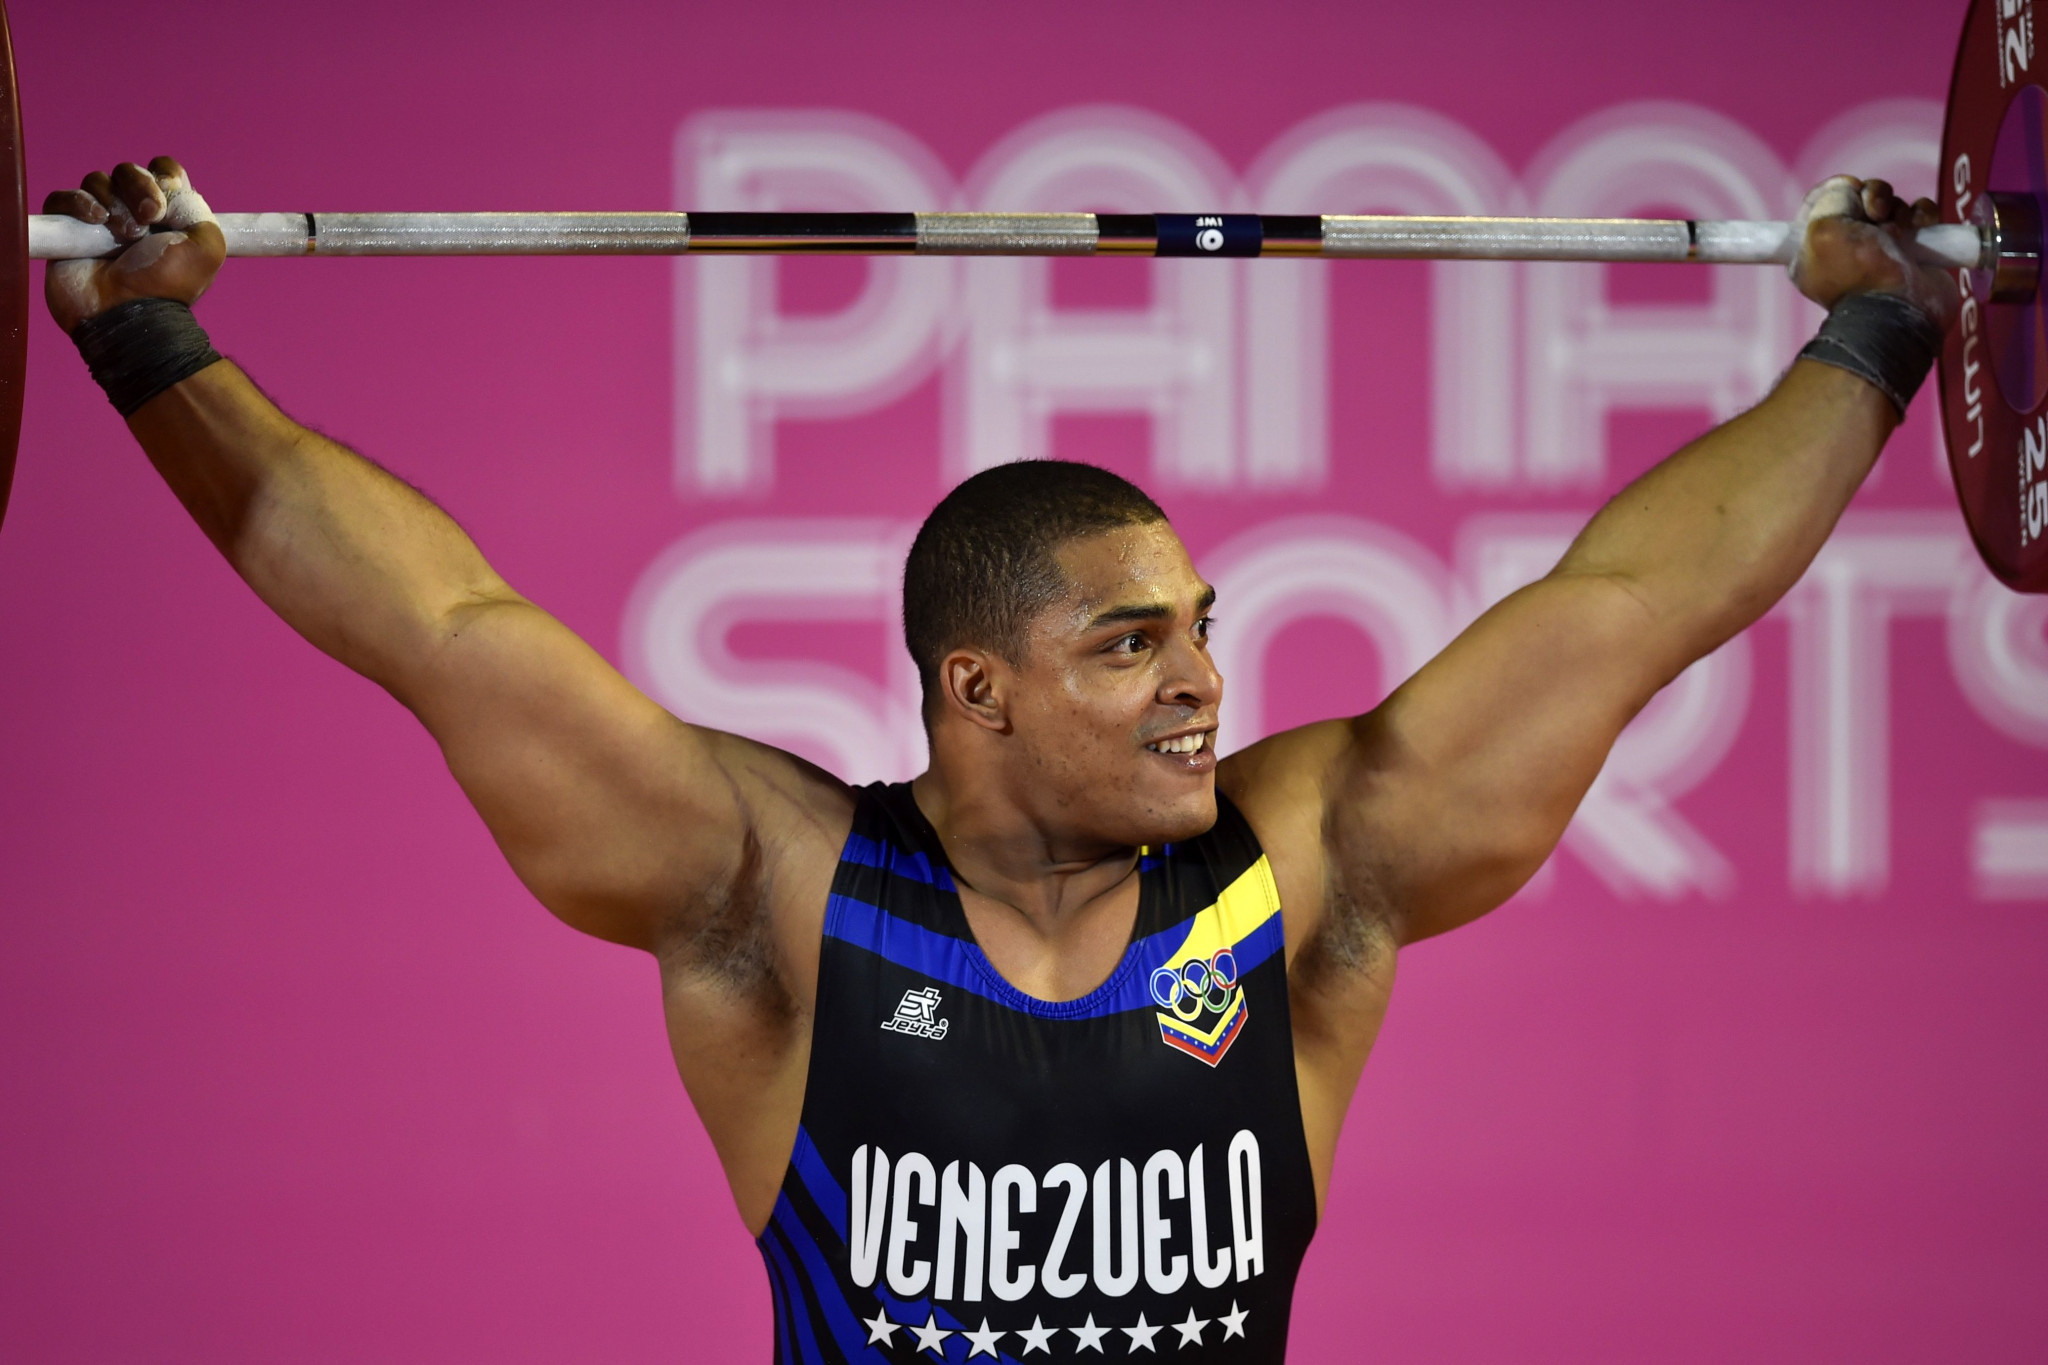 Pan American Weightlifting Federation to hold Hall of Fame inauguration ceremony